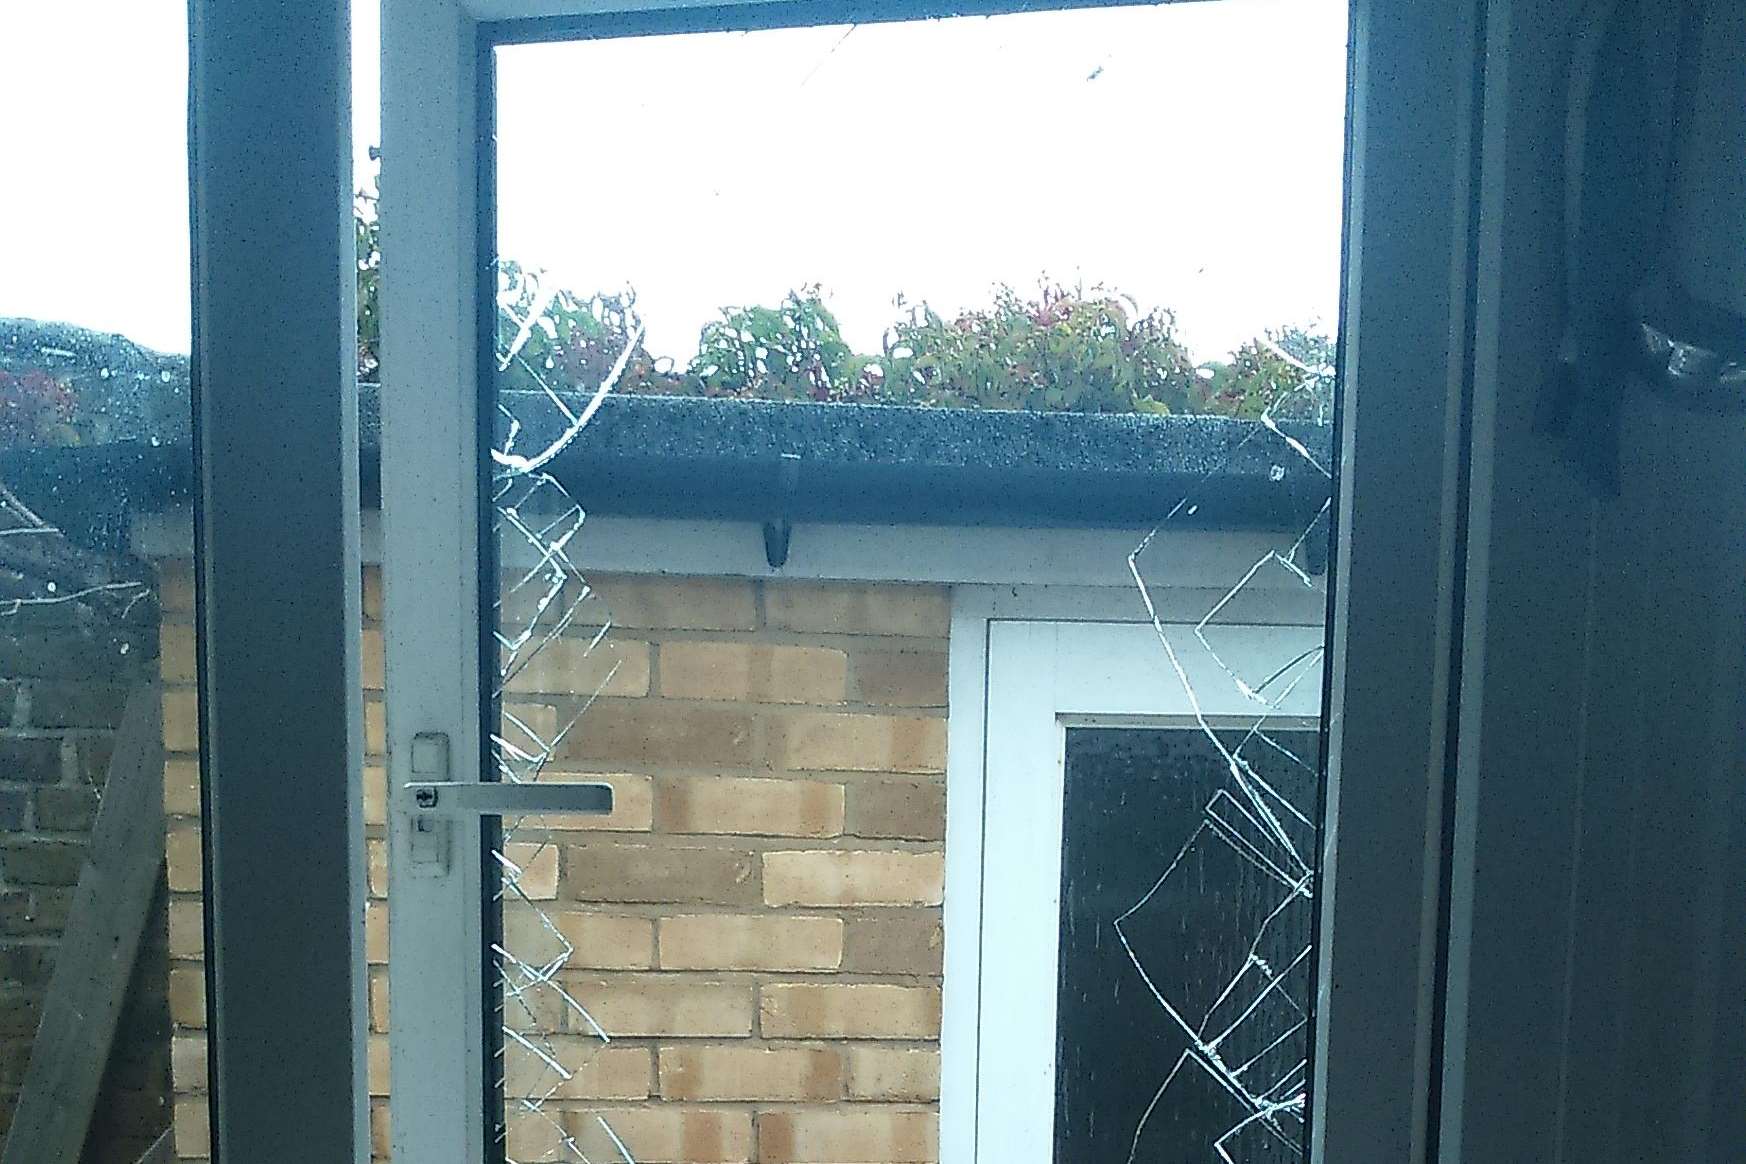 A window was smashed to gain access to the home